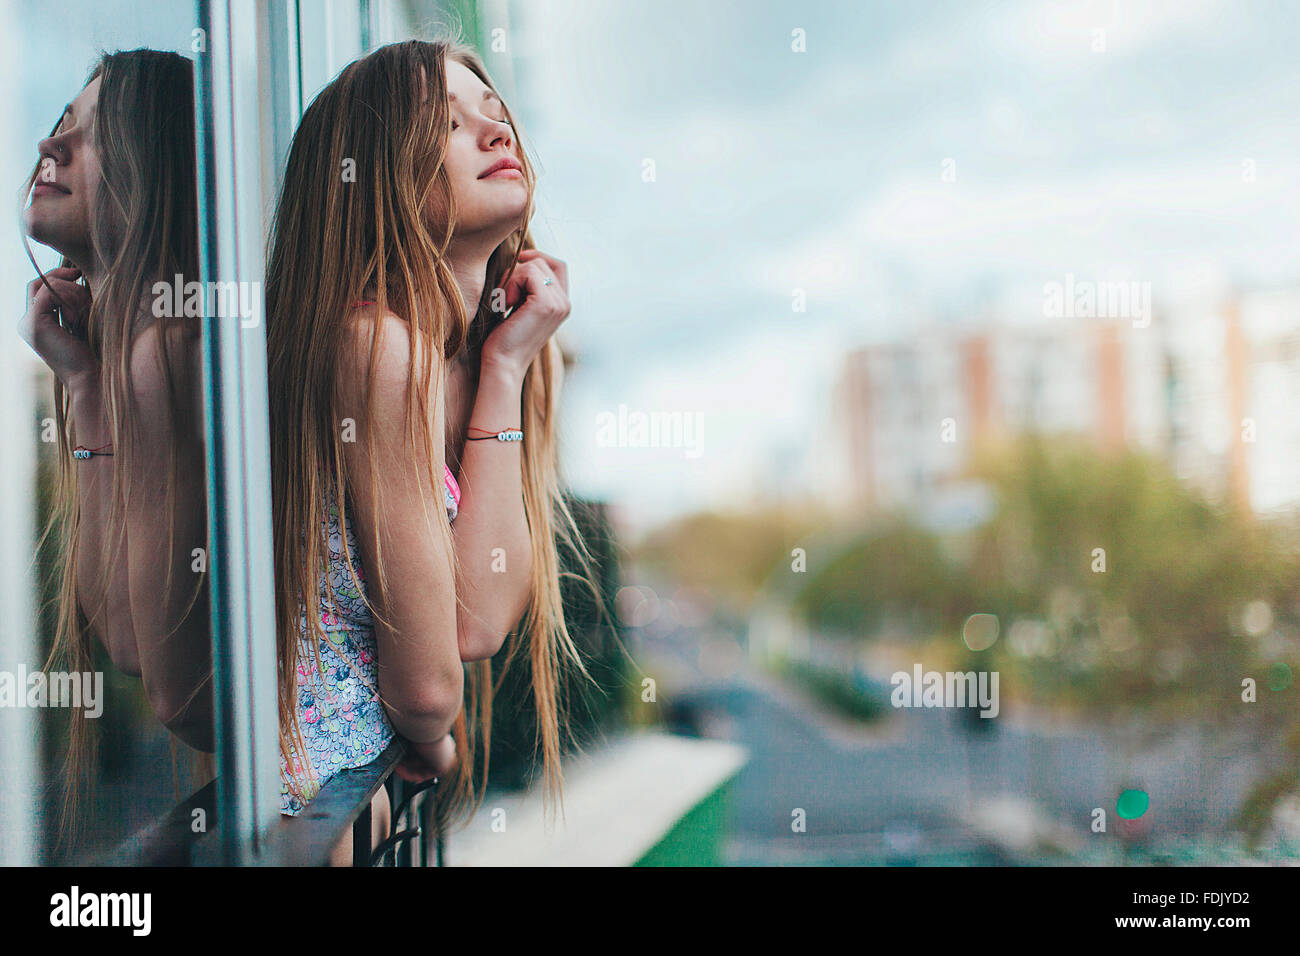 Young woman leaning out of a window in city, Seville, Spain Stock Photo